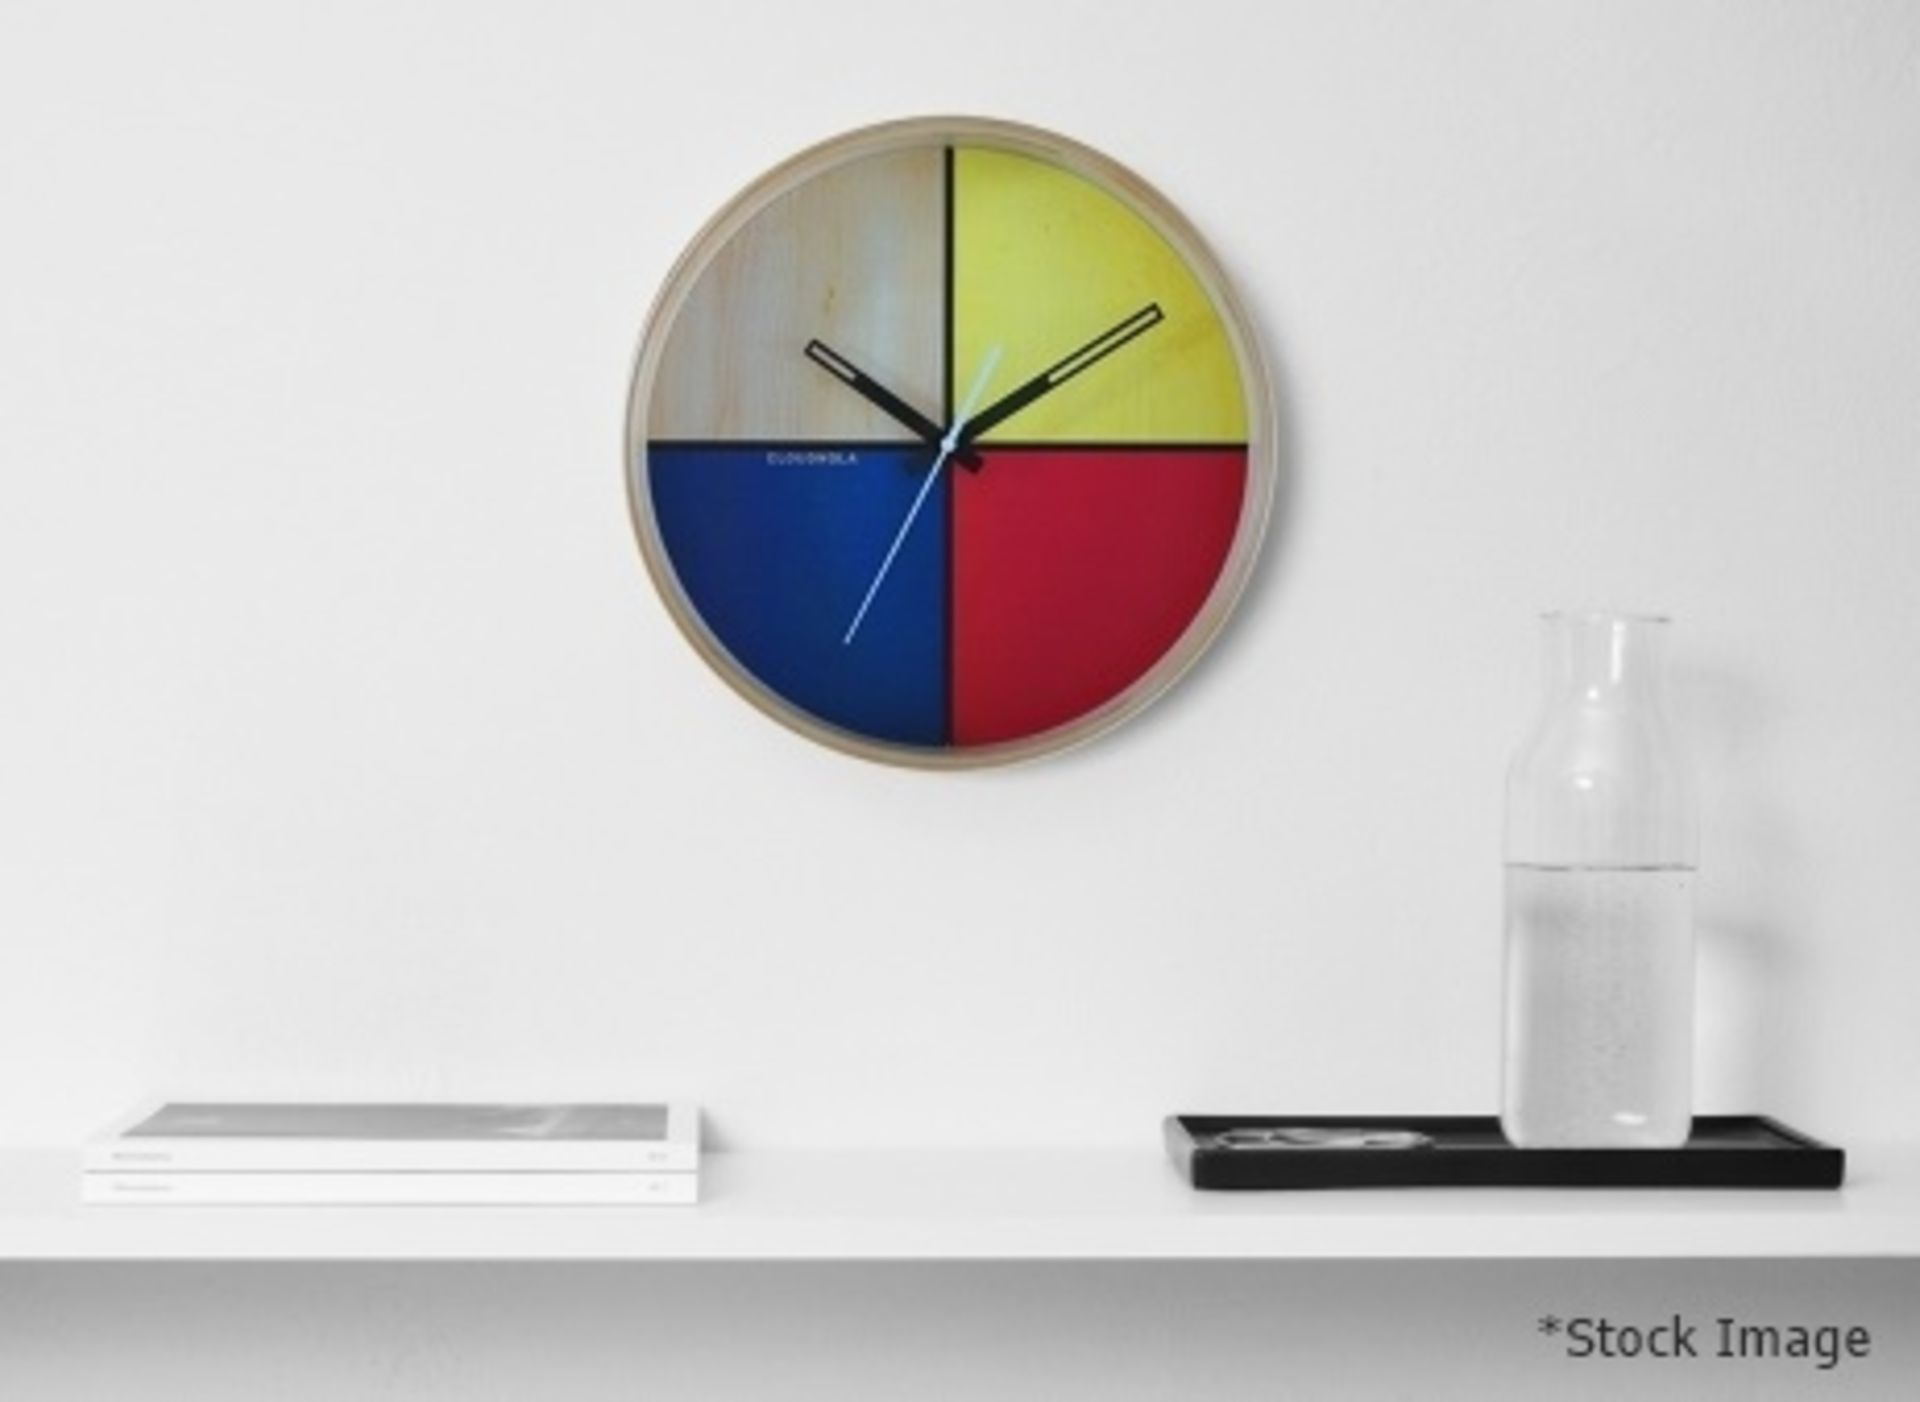 1 x CLOUDNOLA Contemporary Flur Yellow, Red, Blue & Birch Wall Clock With Offset Wooden Rim 30cm - Image 4 of 8